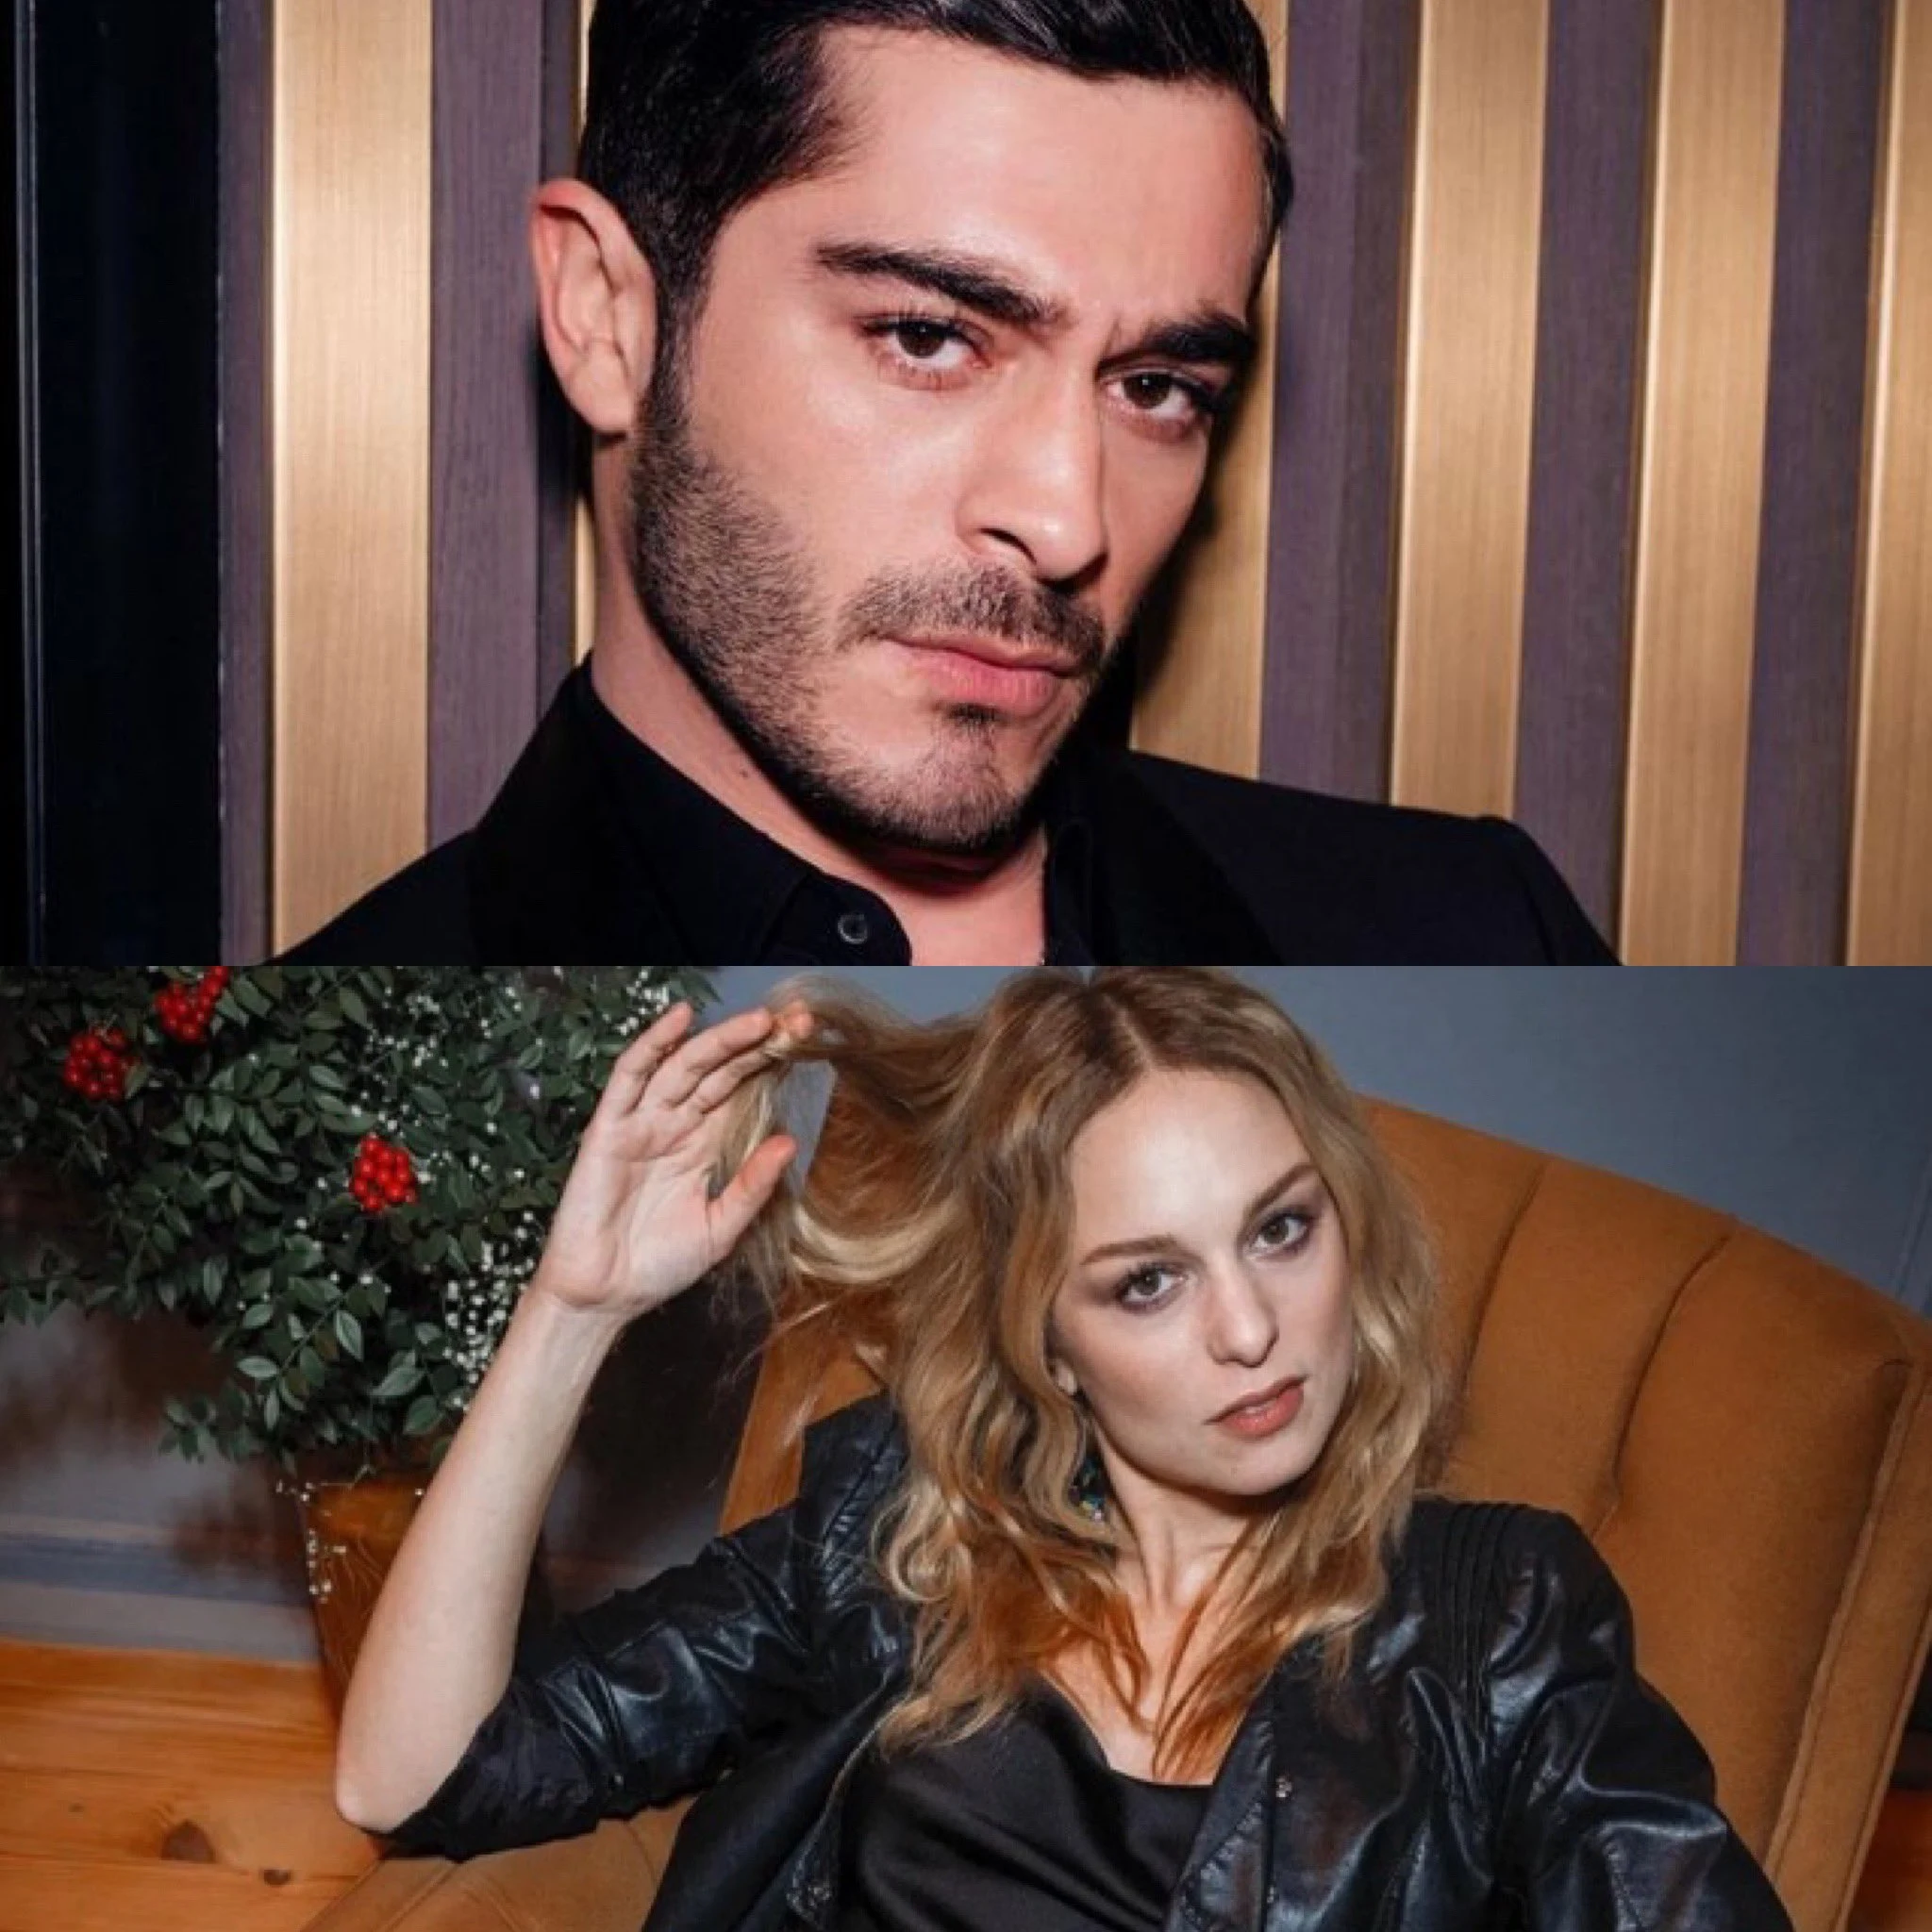 An important development has occurred regarding the legal dispute between Nilperi Şahinkaya and Burak Deniz, stemming from an incident at the Adana Film Festival last year. Here's a clear summary of the latest updates: